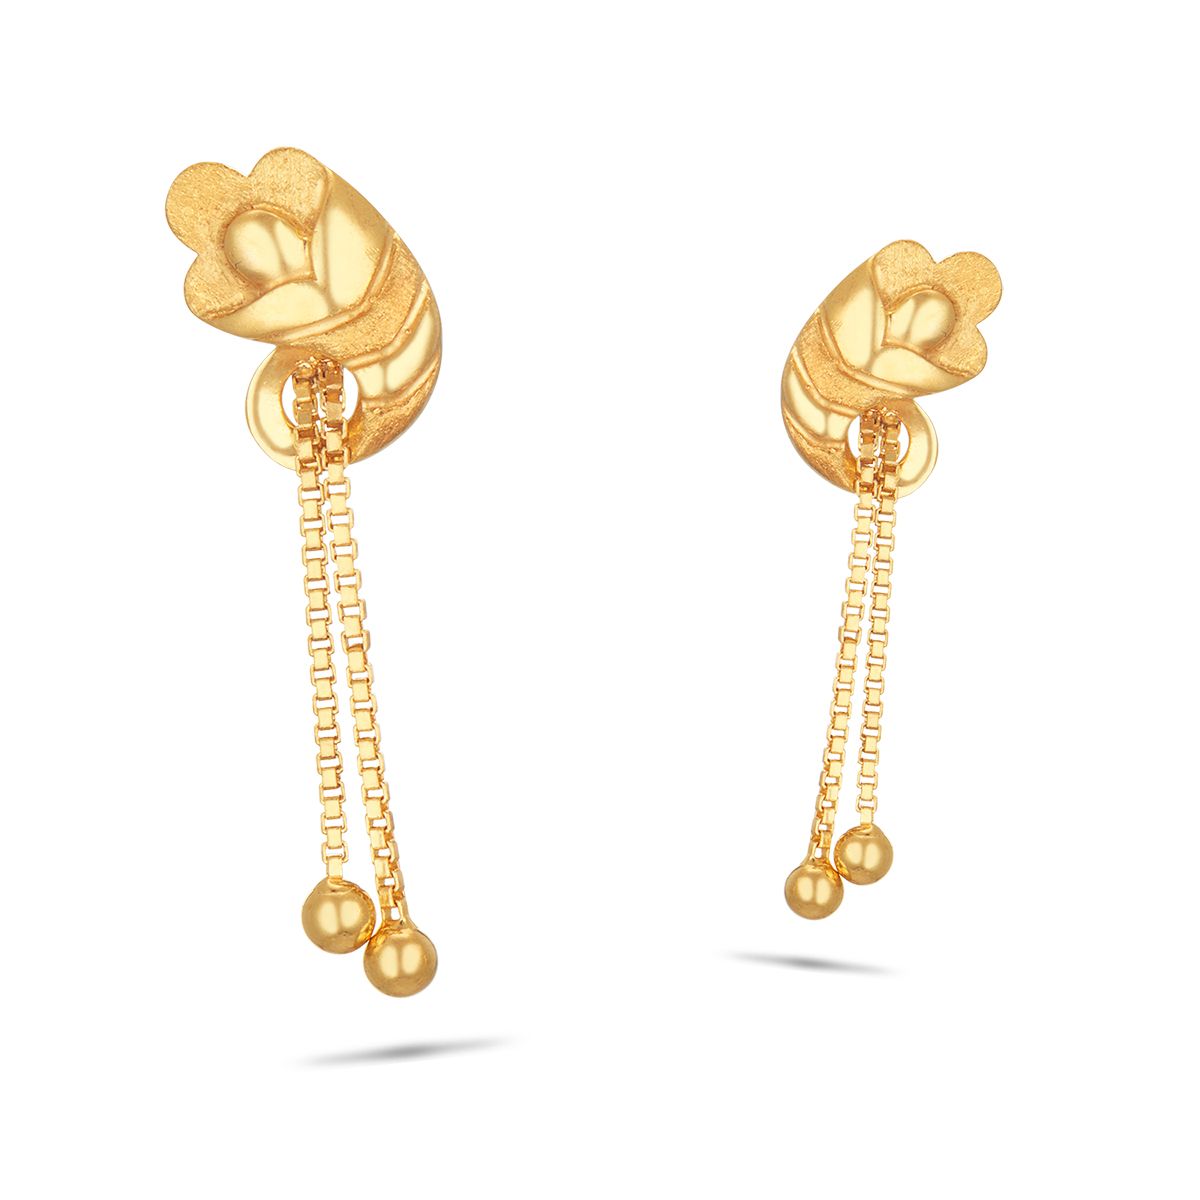 22k gold earring designs with Weight and Price @TheFashionPlus - YouTube